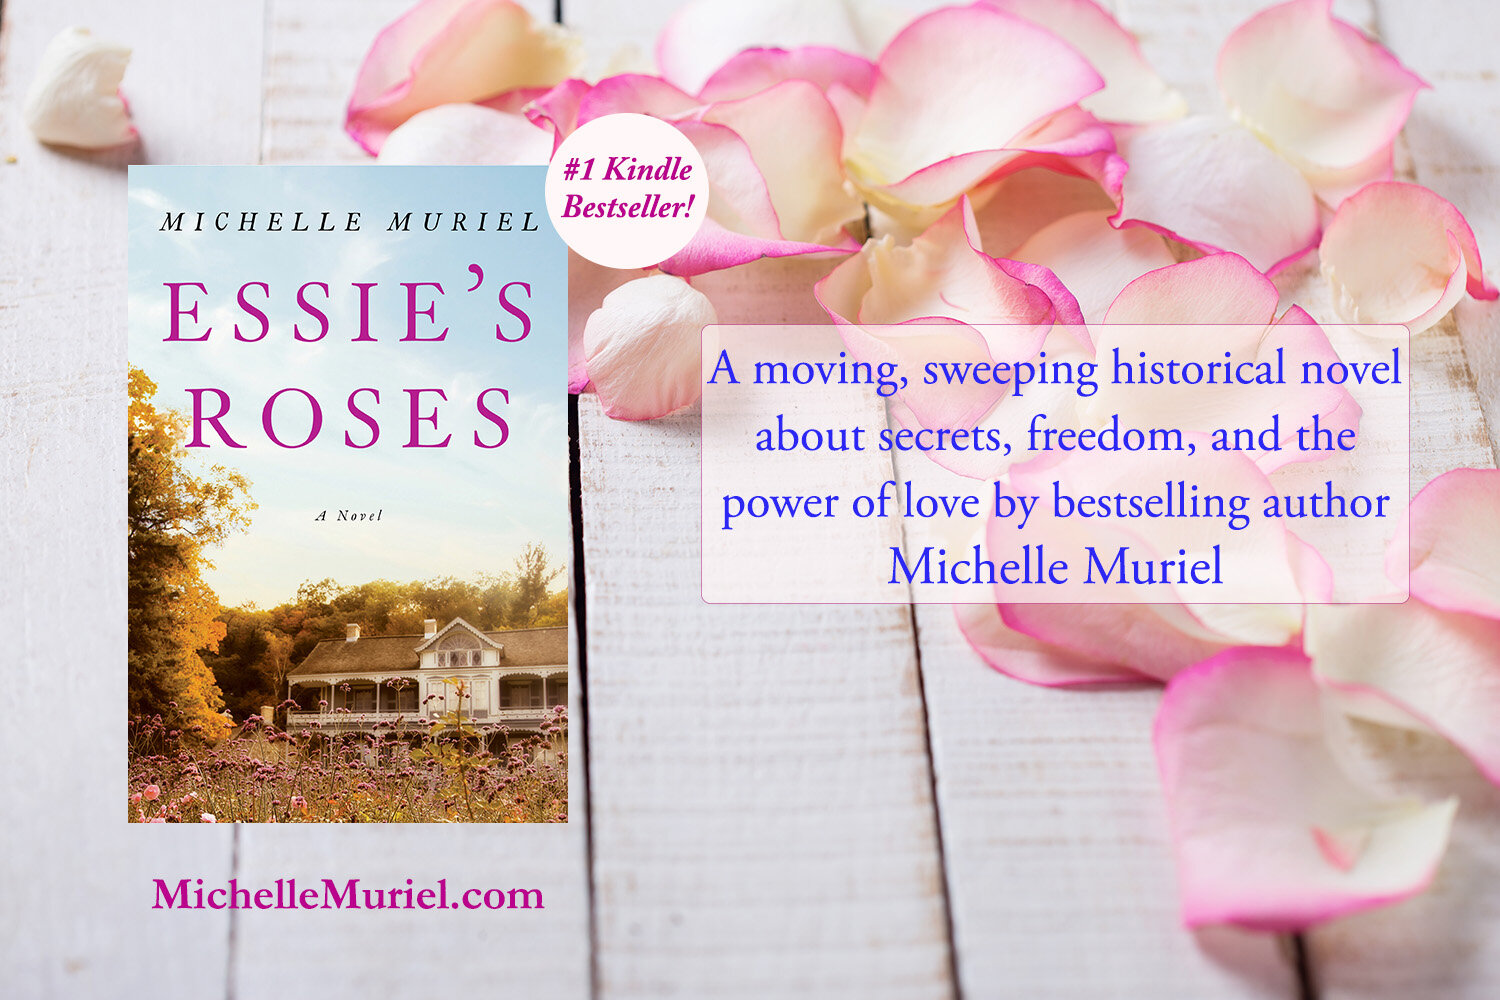 Essies Roses a sweeping moving historical novel by bestselling author Michelle Muriel 2021.jpg